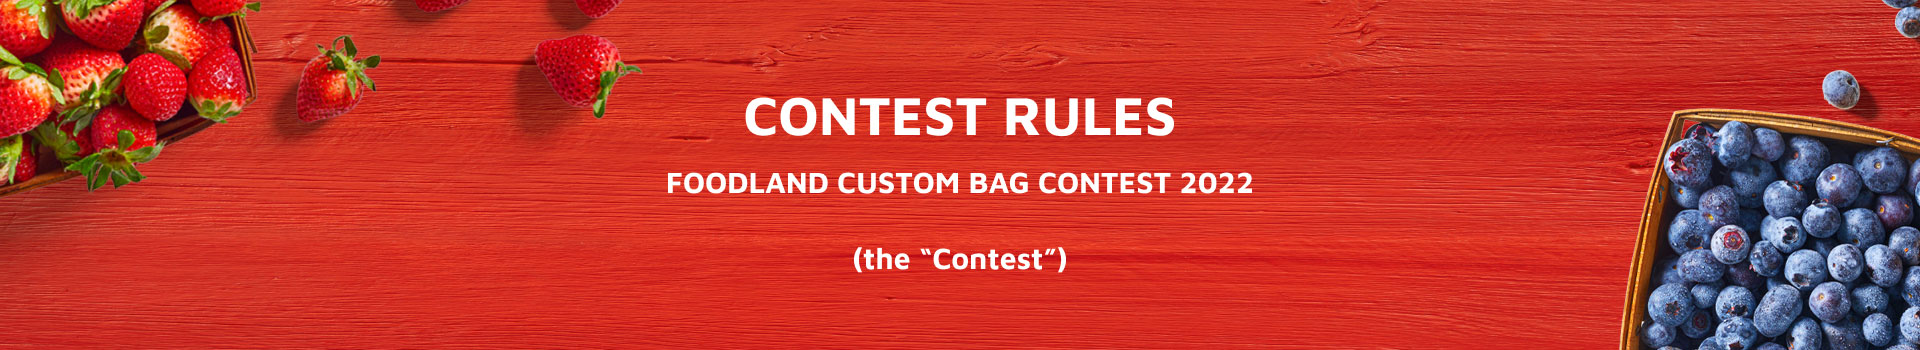 Foodland contest rules